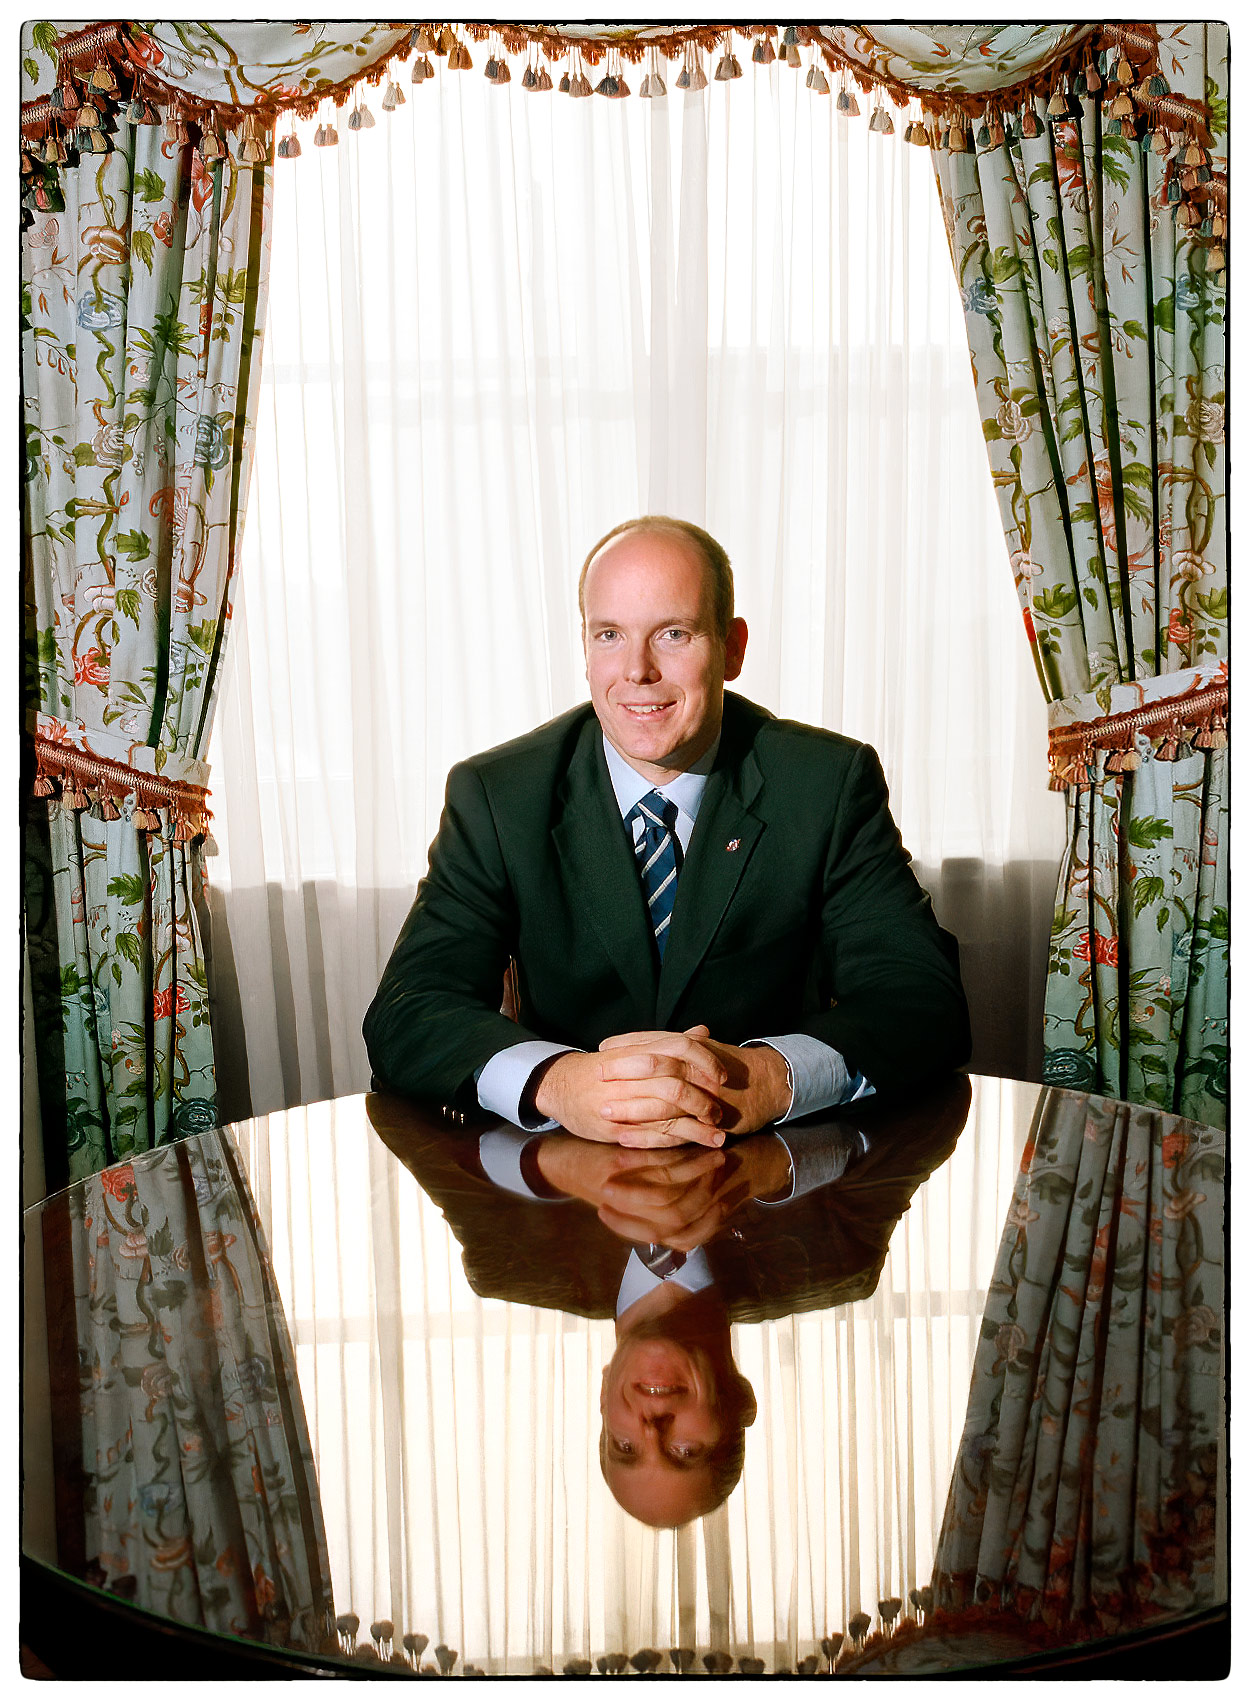 an official portrait of prince albert II of monaco at the royal york hotel in toronto